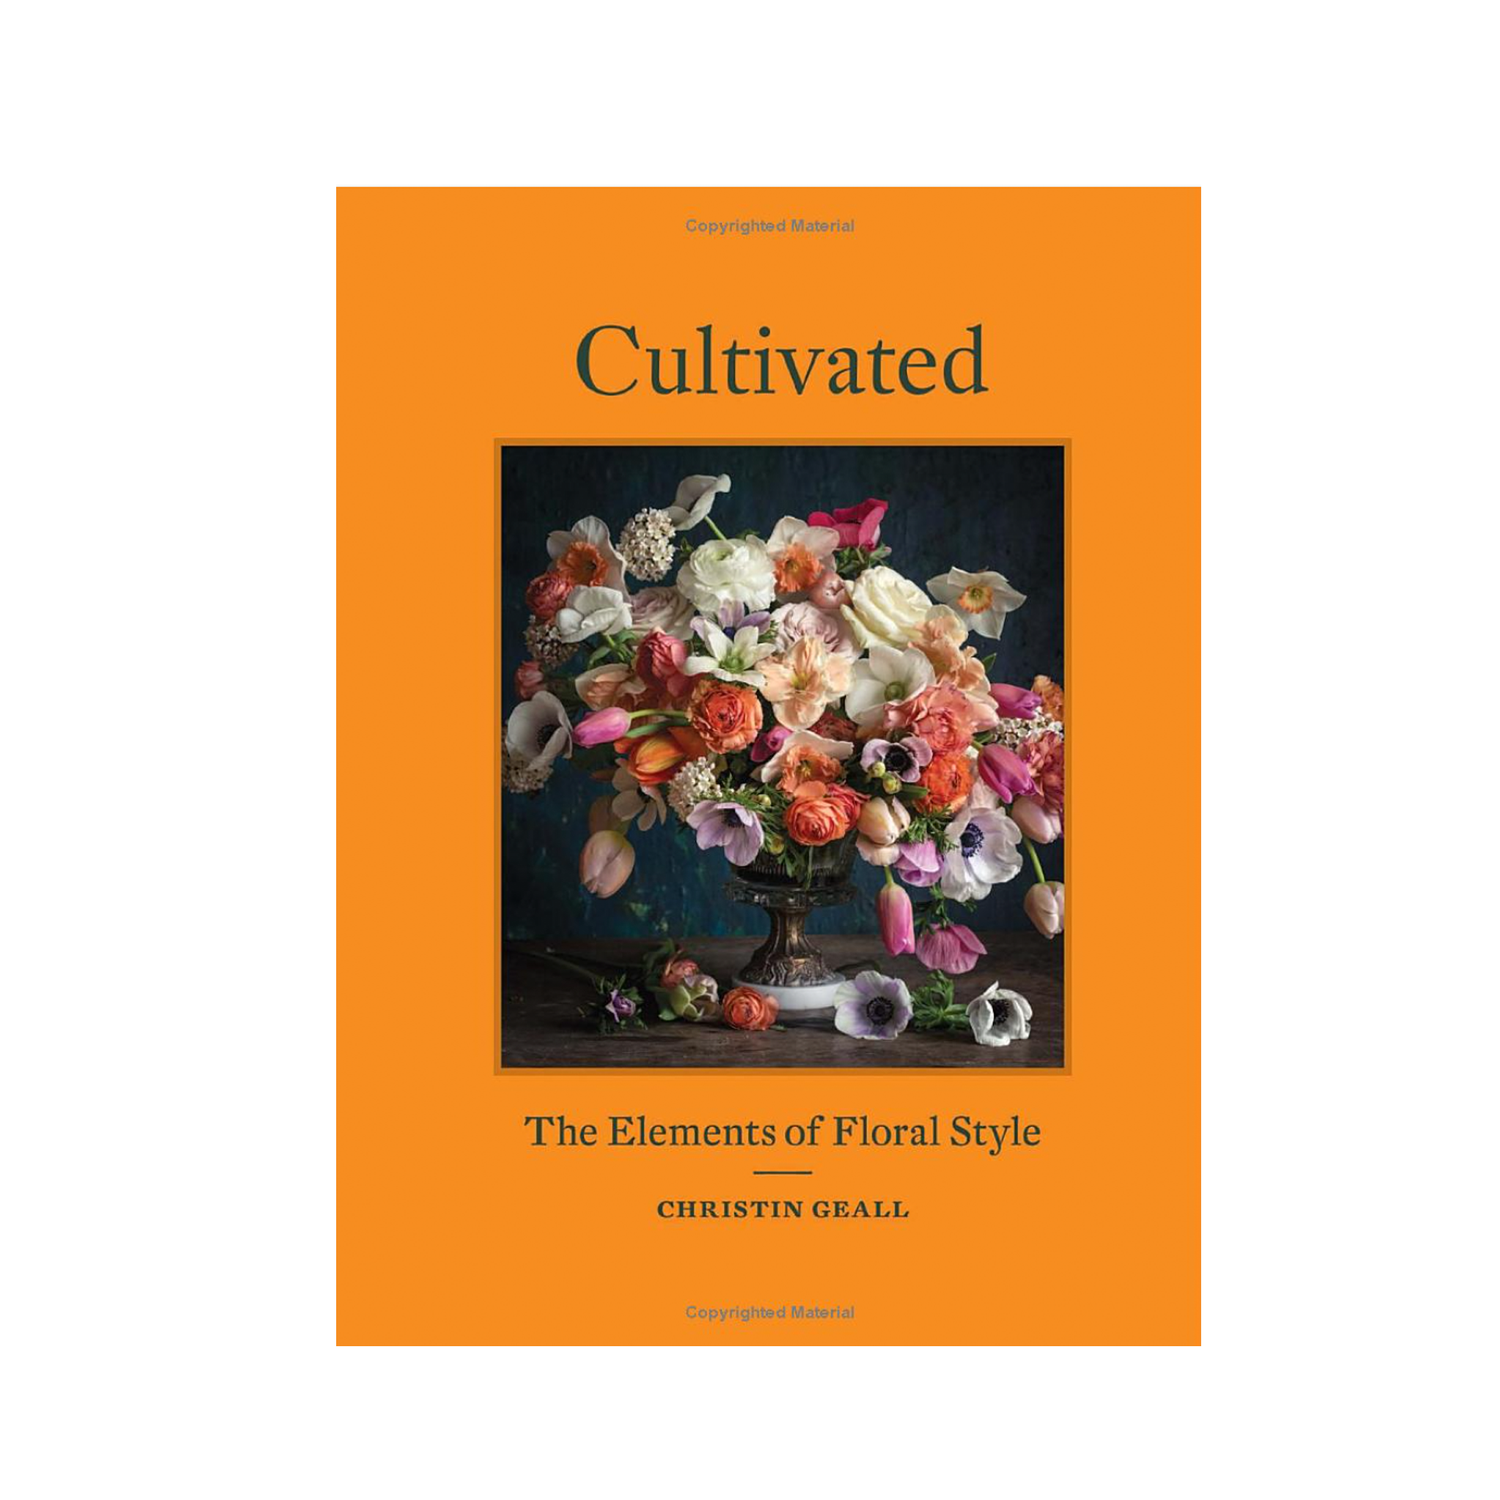 Livro Cultivated the Elements of Floral Style